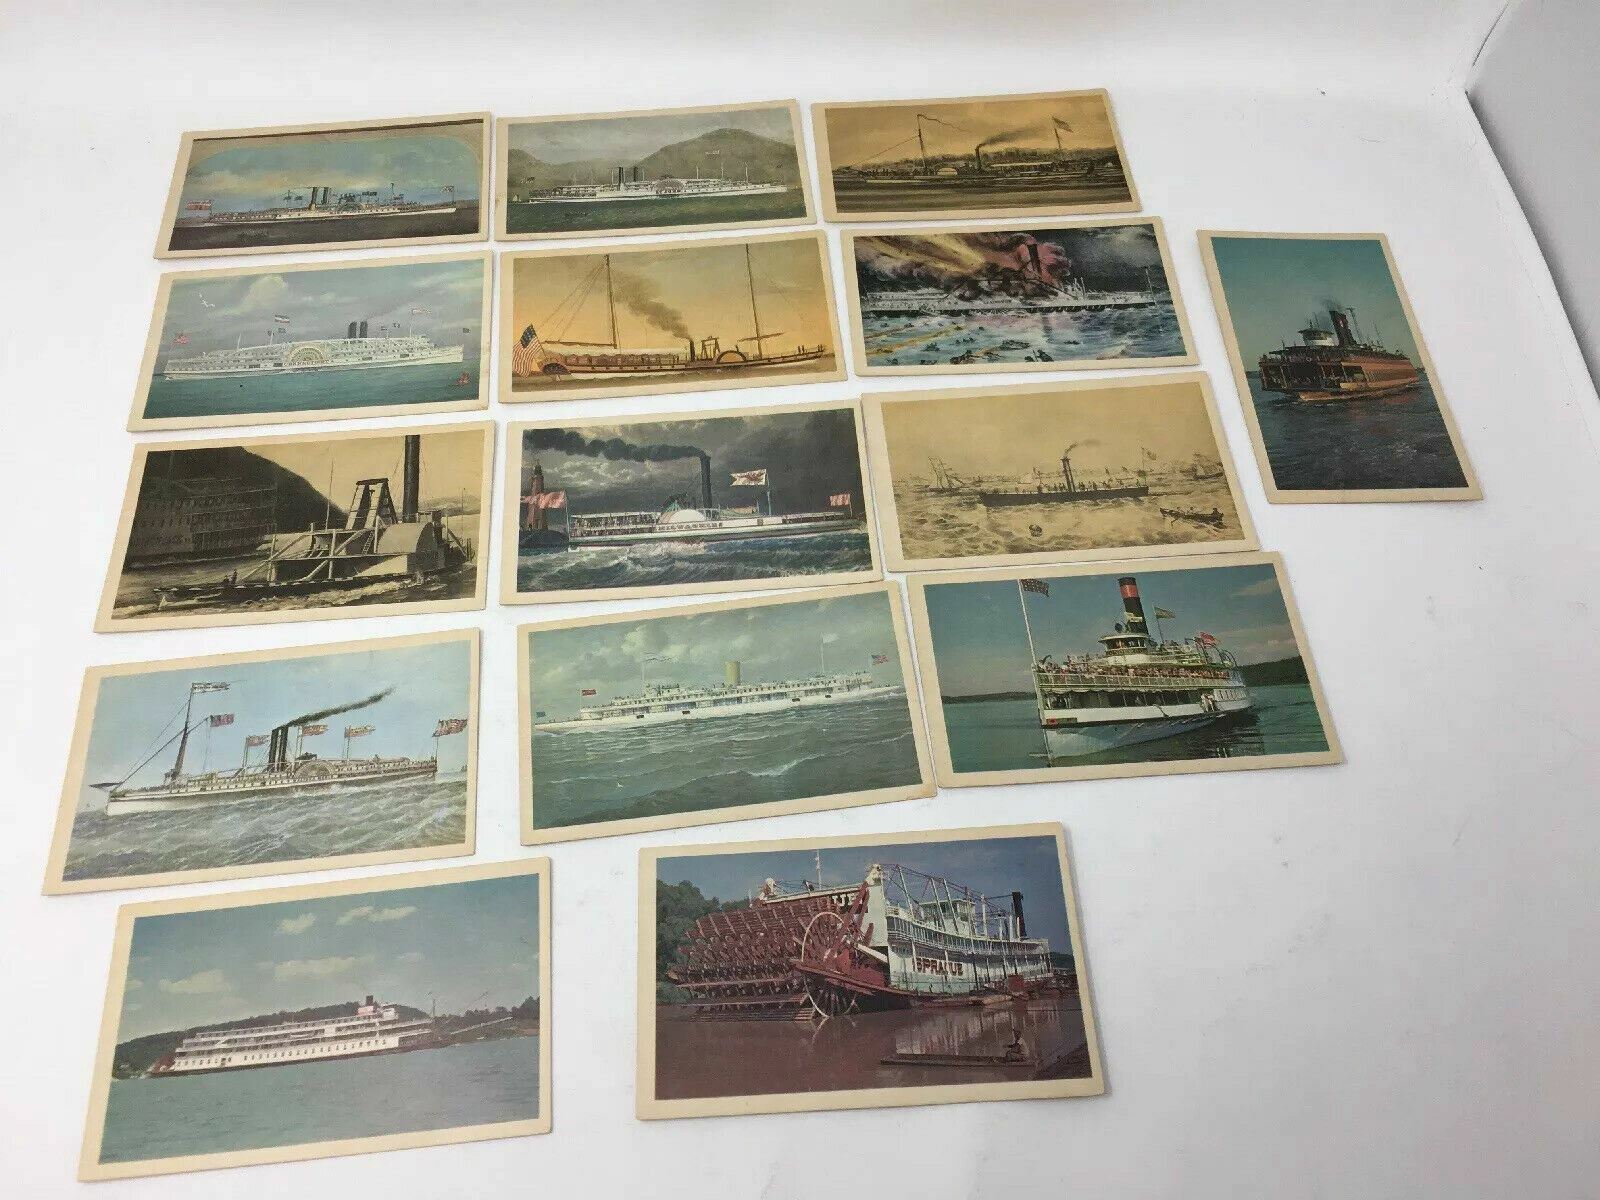 Vintage Ship Boat & Paddle Boat Picture & Information Cards Lot of 15 